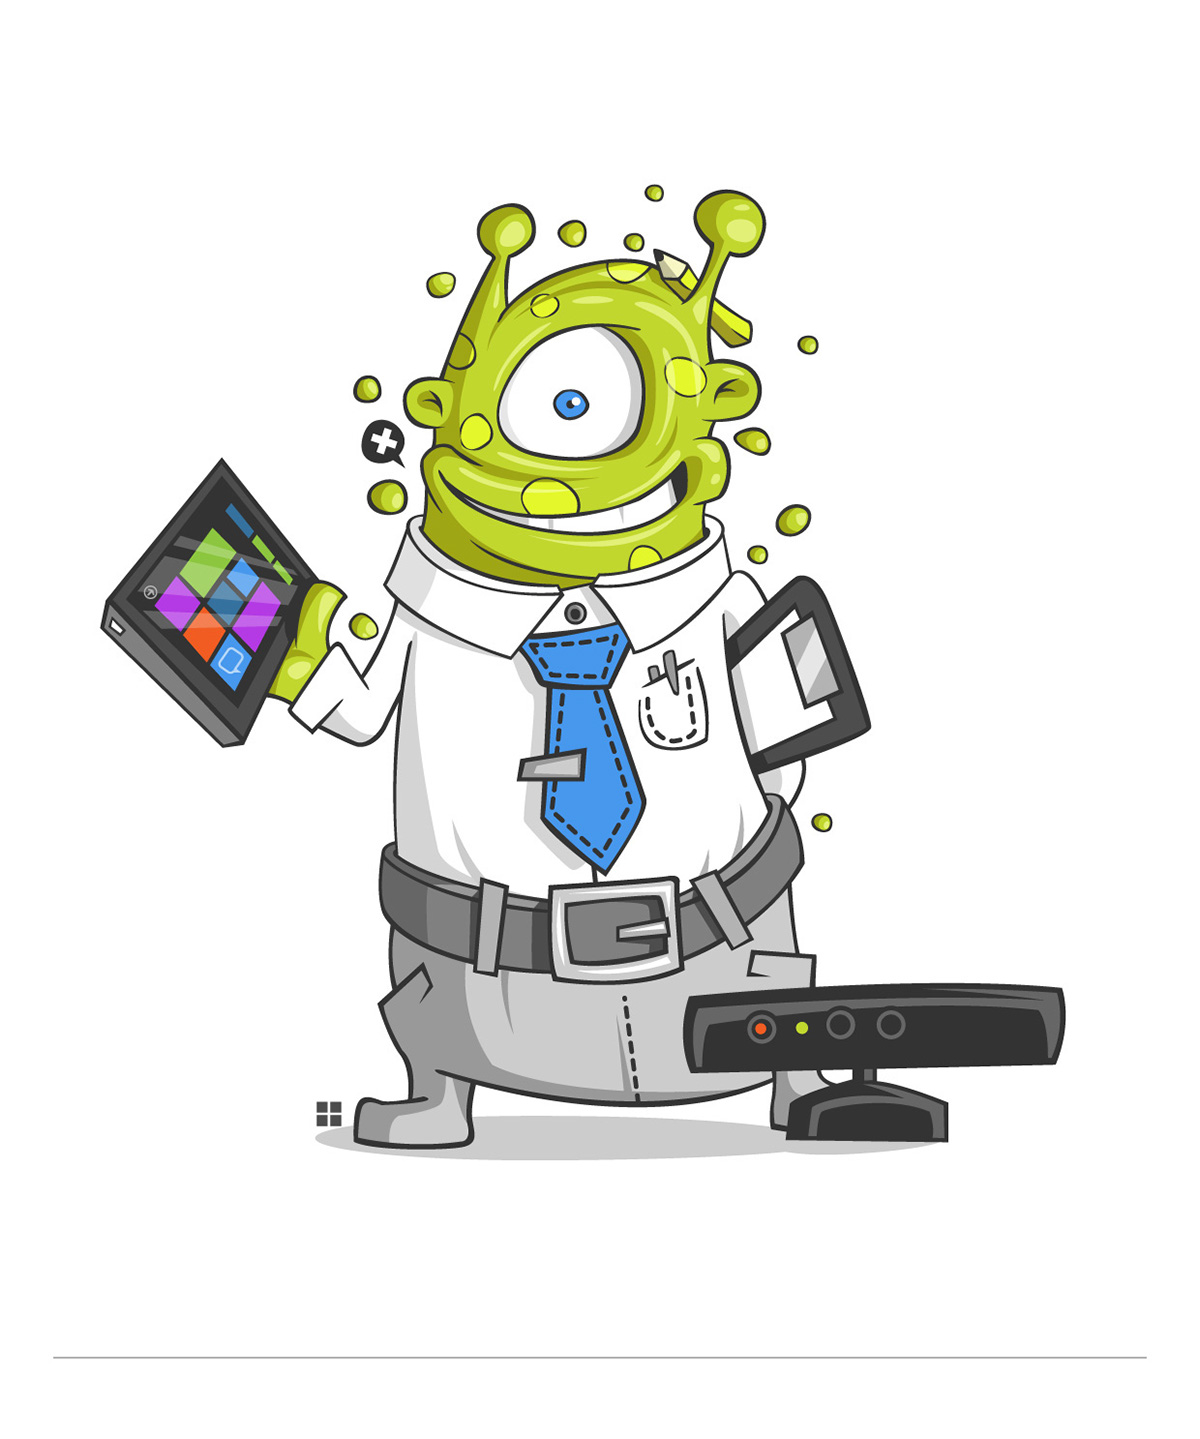 Character  Character Design  vector  aliens  Monsters   Robots  tablet  kirpluk  Vector Characters  Microsoft  kinect  xbox  games design  Illustration